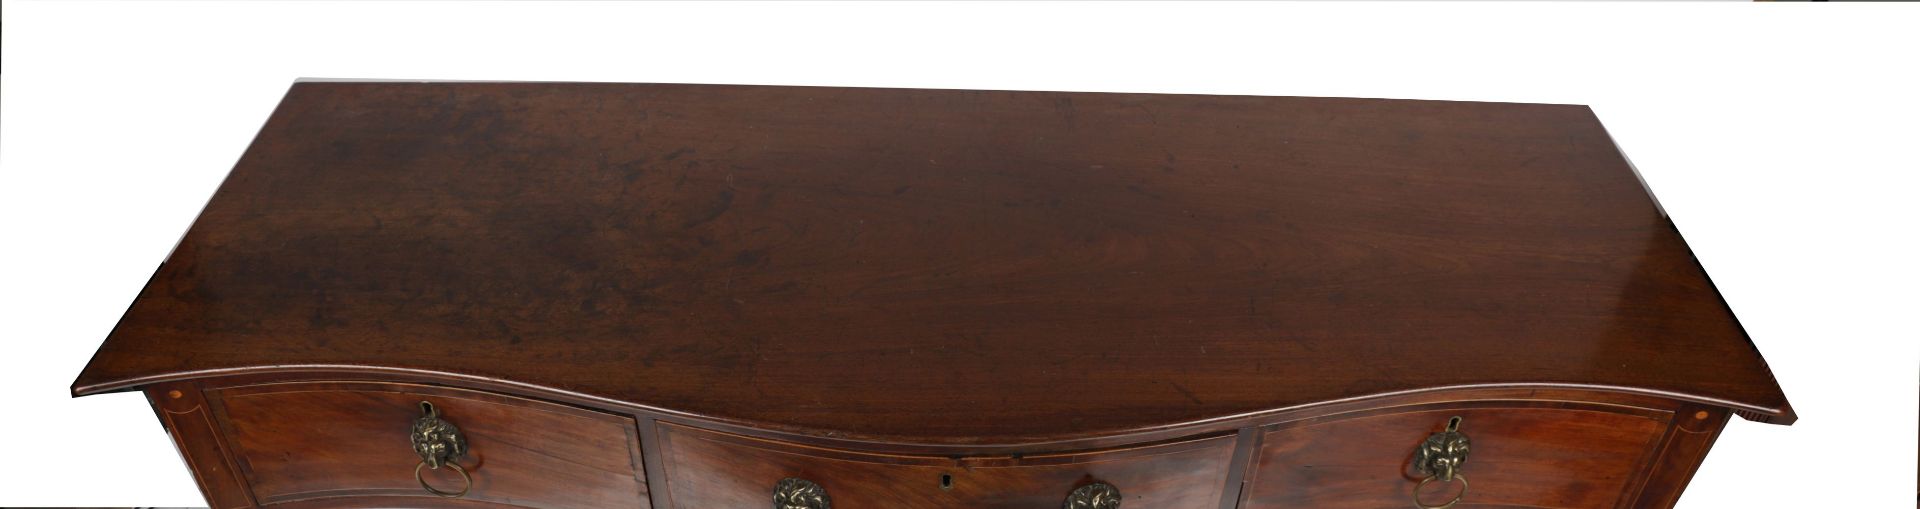 GEORGE III MAHOGANY AND INLAID SIDE TABLE - Image 2 of 2